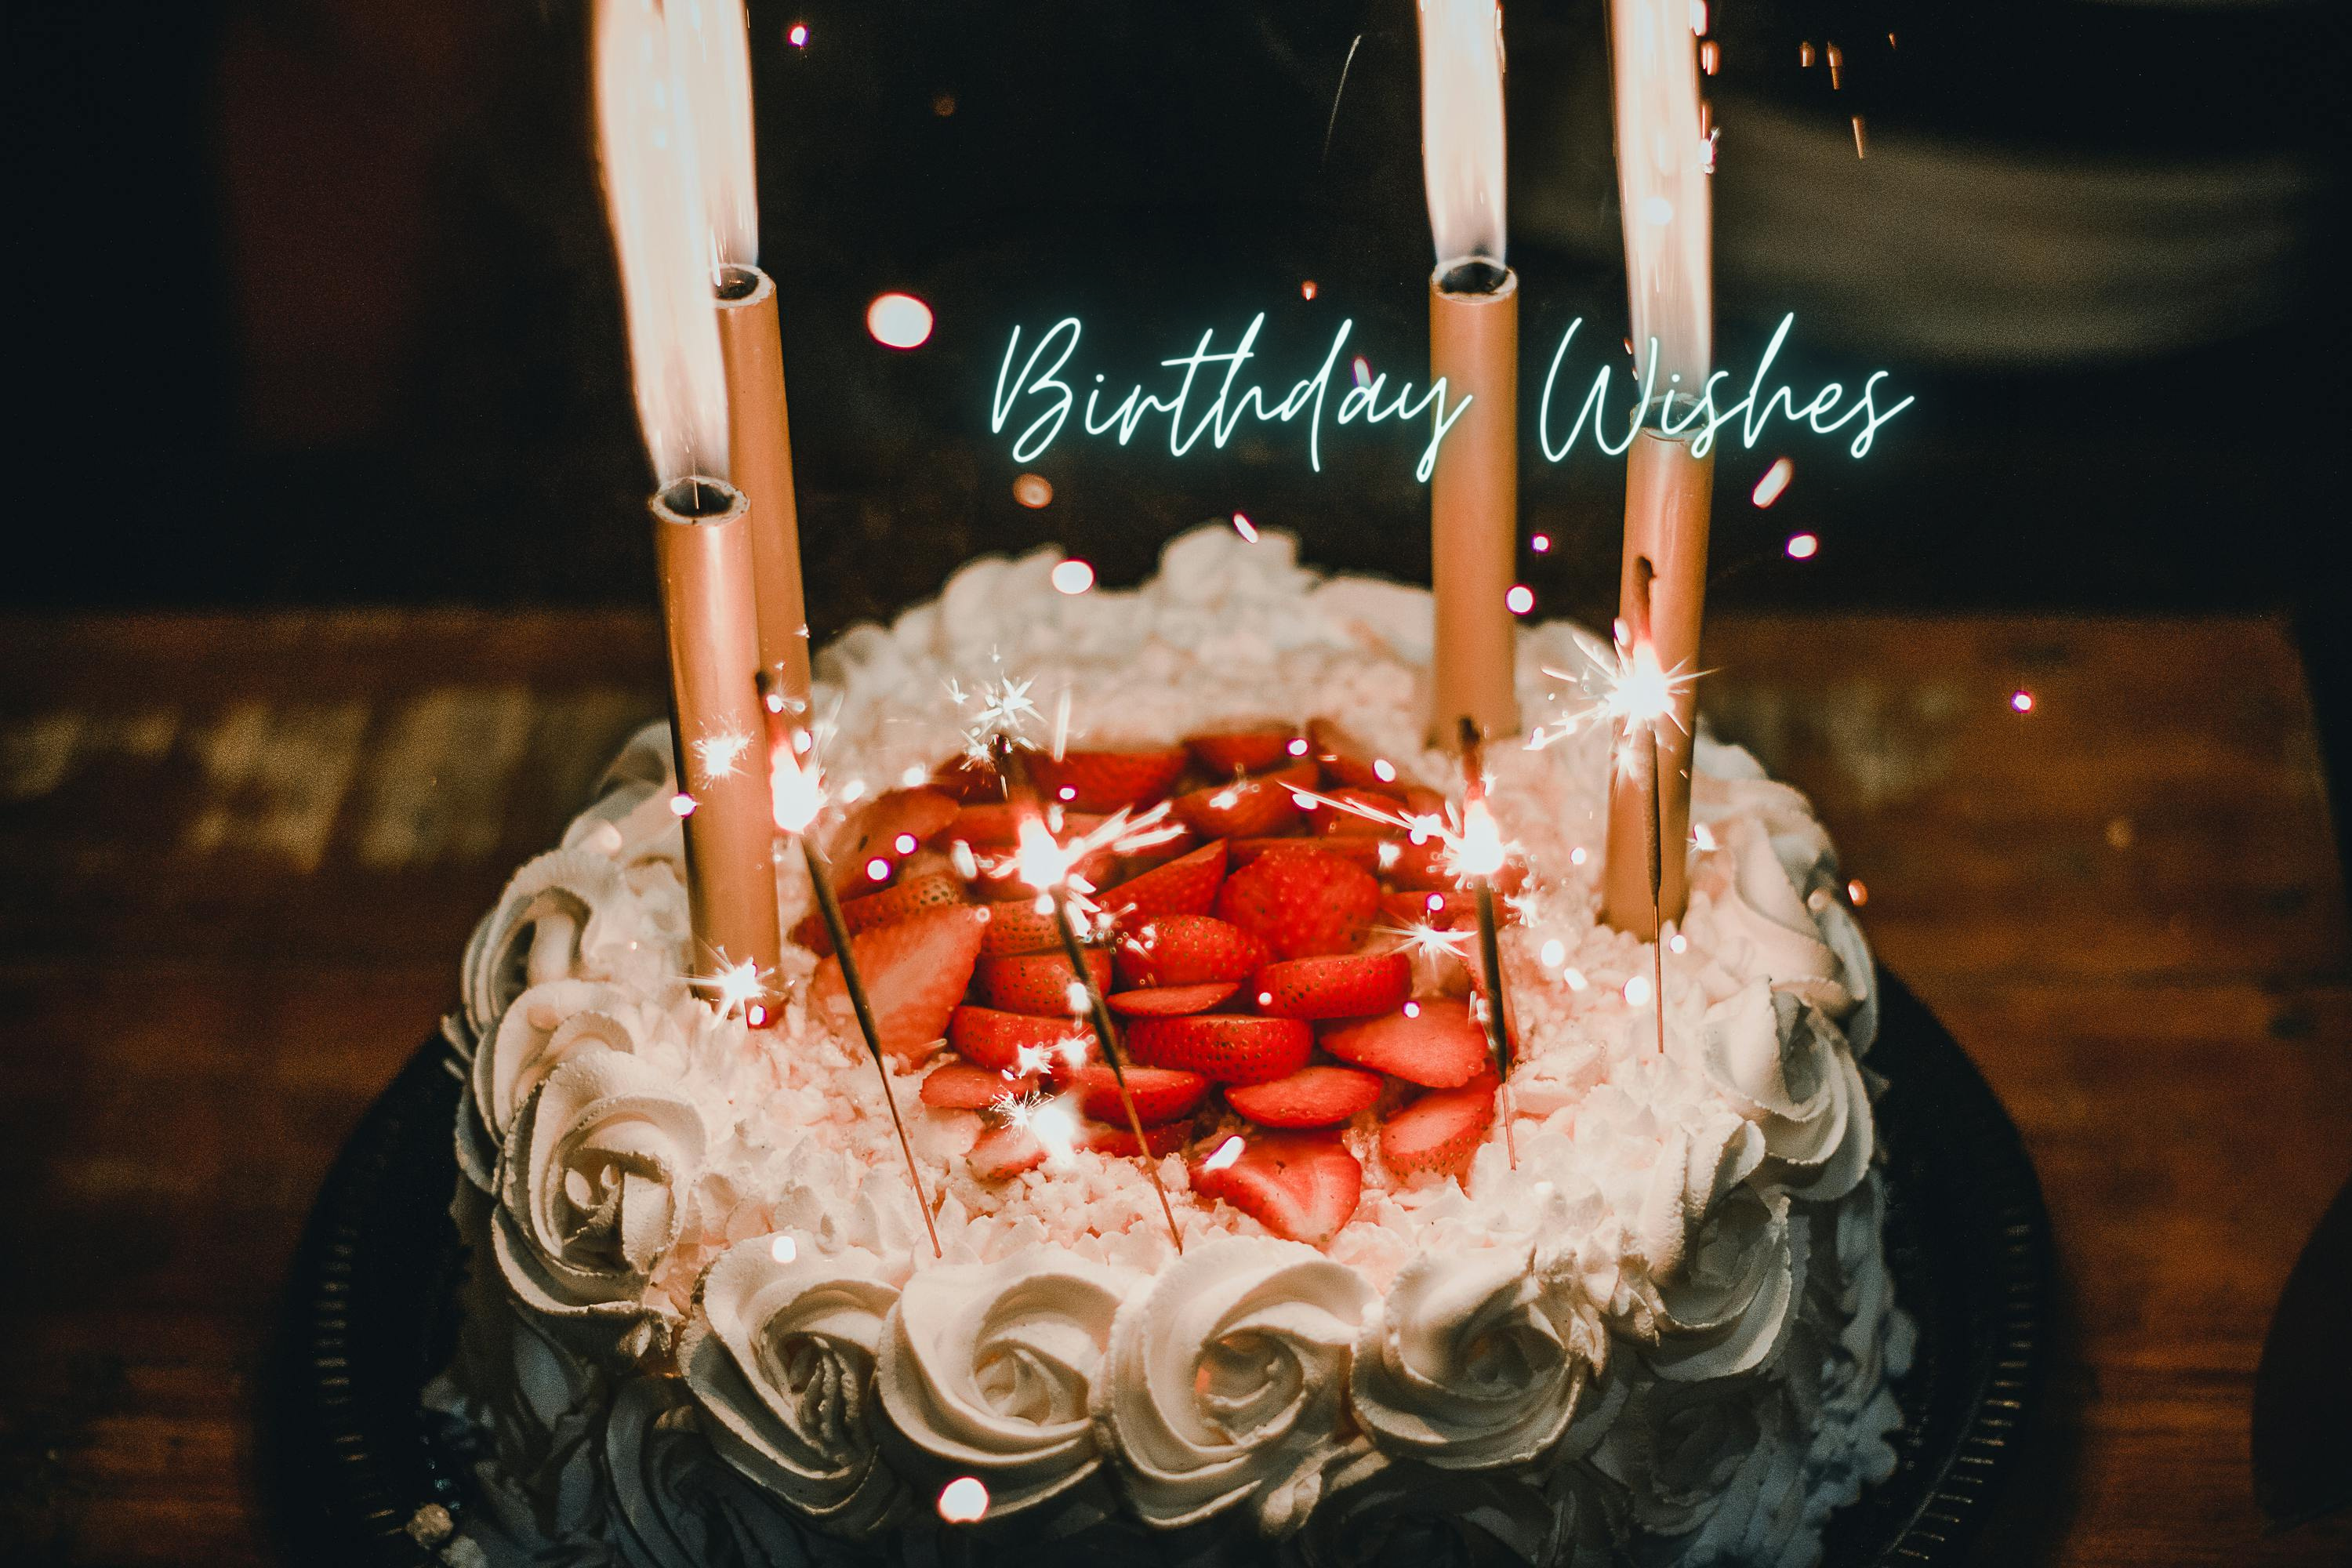 Friendships Matter: Meaningful Birthday Wishes to Show You Care